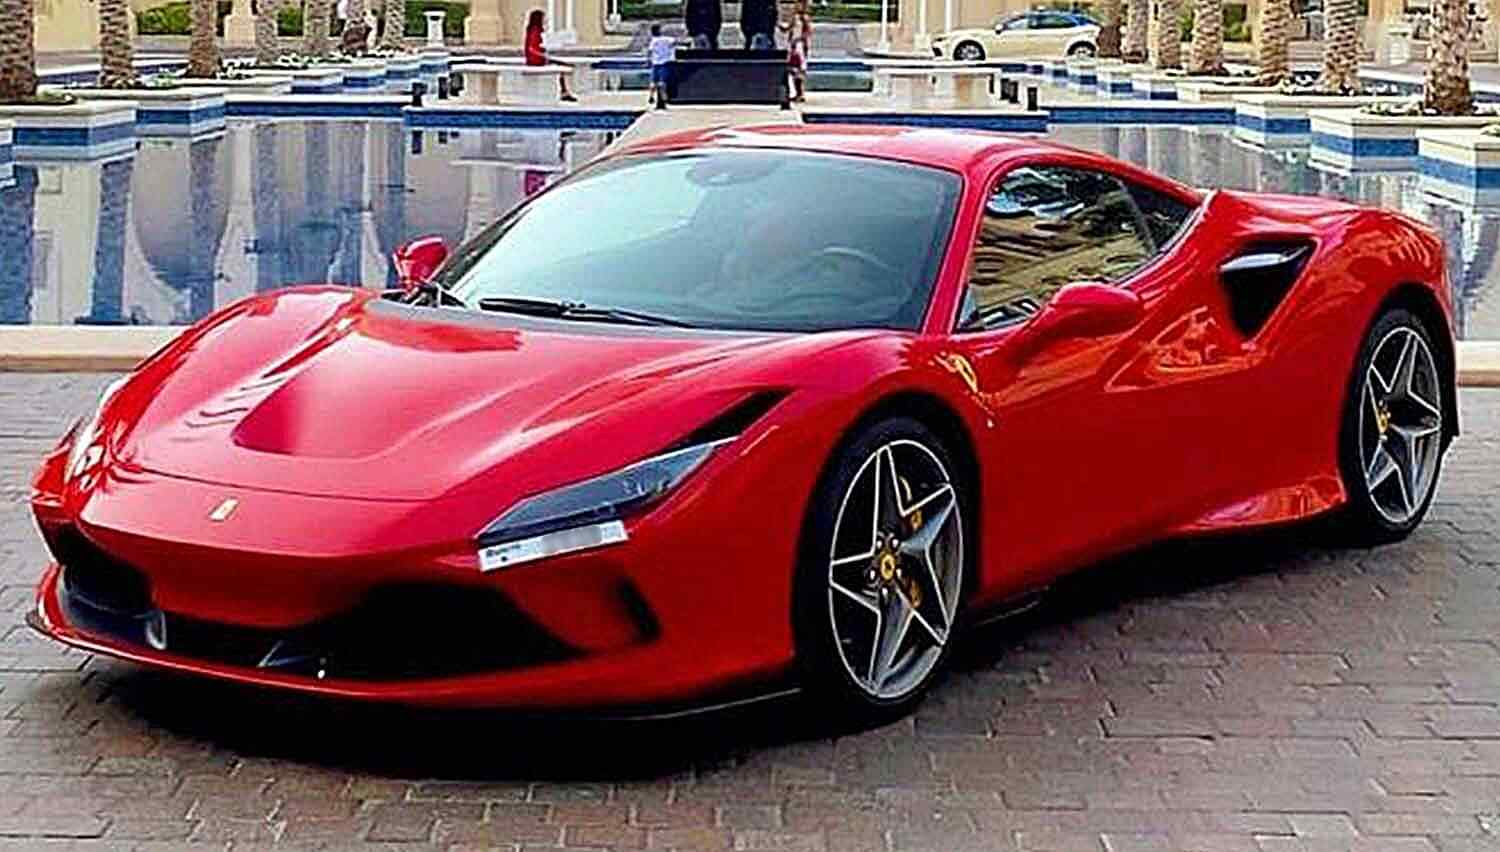 Embodying elegance and speed, a Ferrari rental in Dubai is a dream come true for automotive enthusiasts.